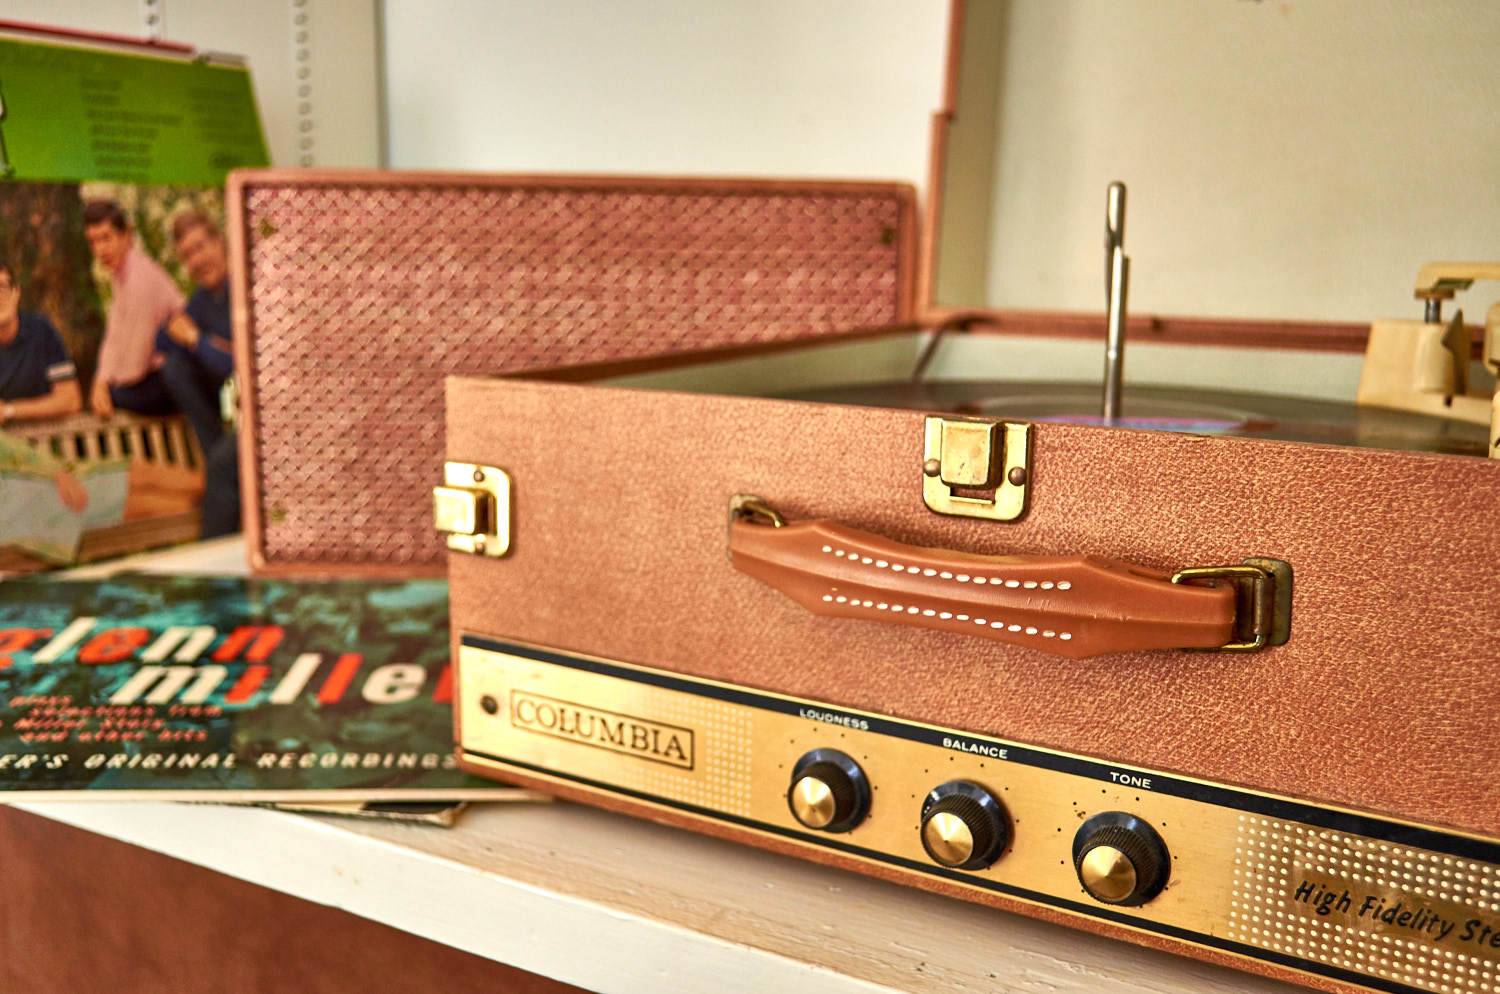 Vinyl records by vintage record player built into a brown suitcase.